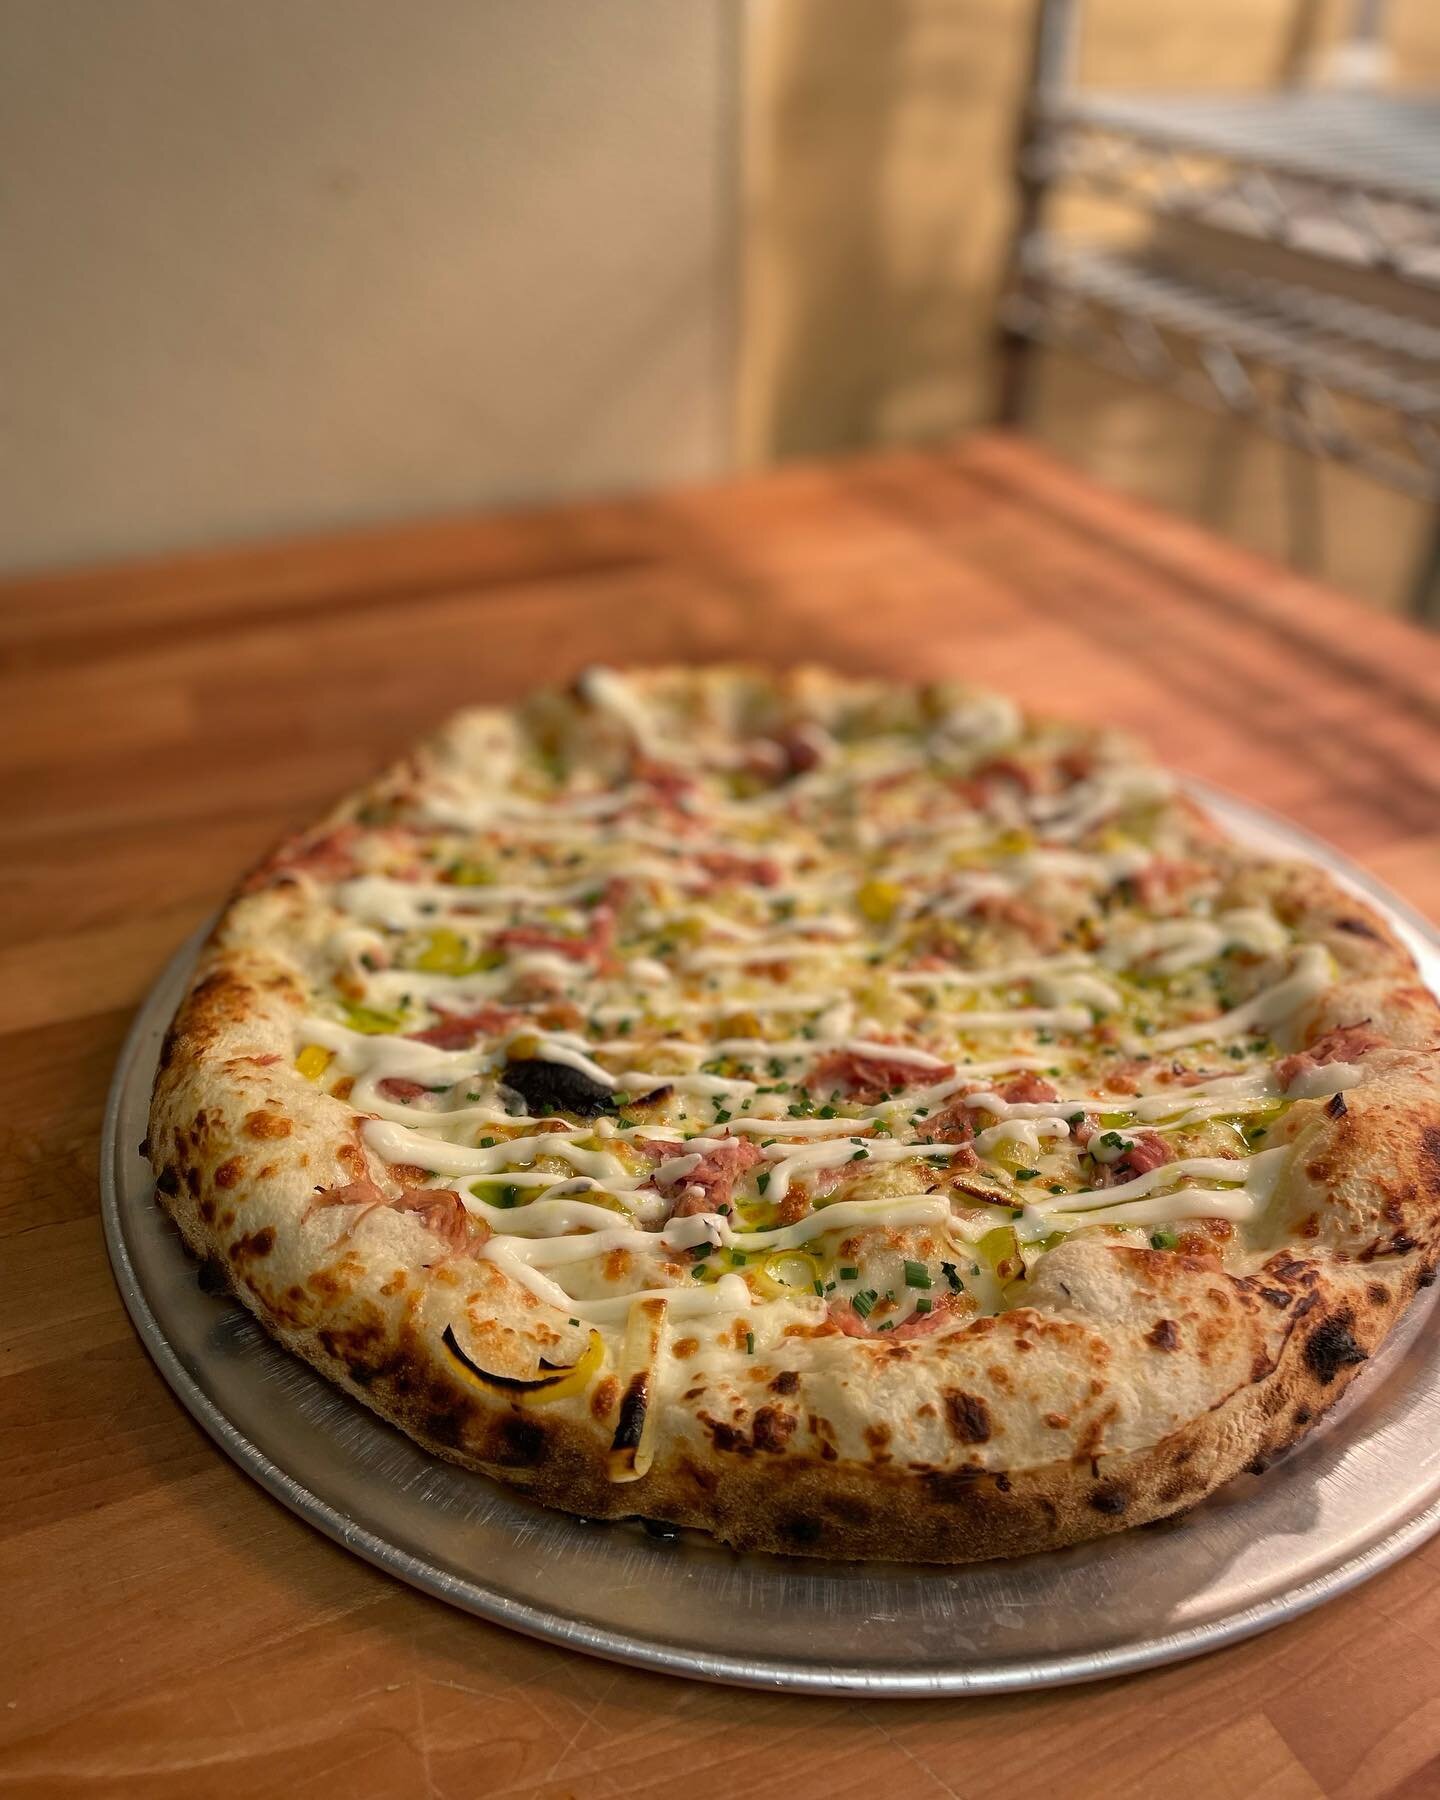 Pizza is always the answer 🍕🍕🍕

Pizza of the Month: Mornay Sauce, Caramelized Onion, Saut&eacute;ed Leeks, Pulled Ham, Fontina

And don&rsquo;t forget our new salad! 
Kale, Arugula, Butternut Squash, Red Onion, Pistachio, Burrata, Pesto 

Hours: 4